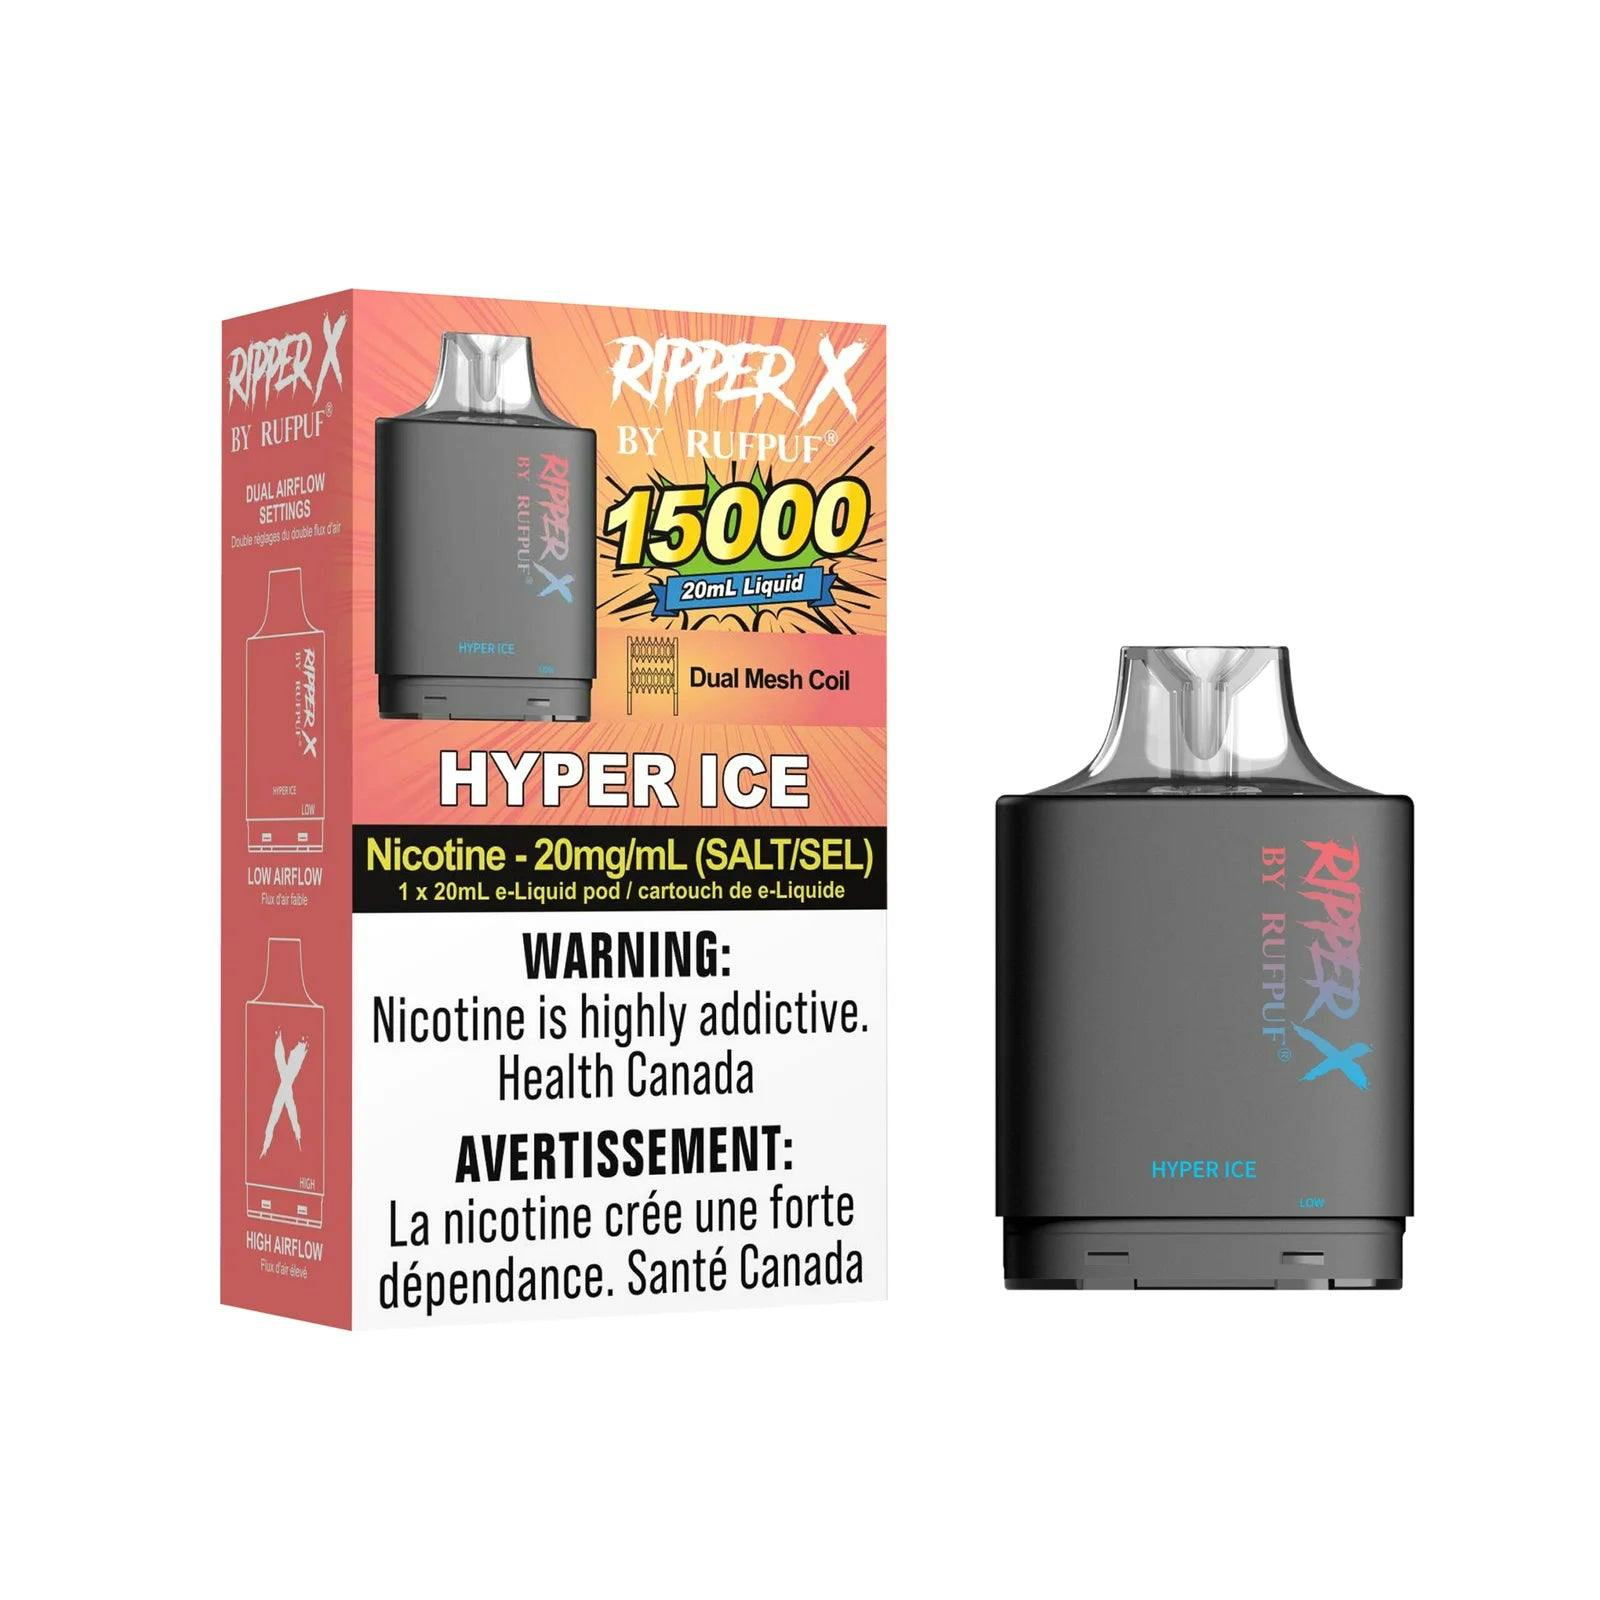 Rufpuf Ripper X 15k (20mg/ML) - 5CT = Excise Version-undefined | For sale Jubilee Distributors